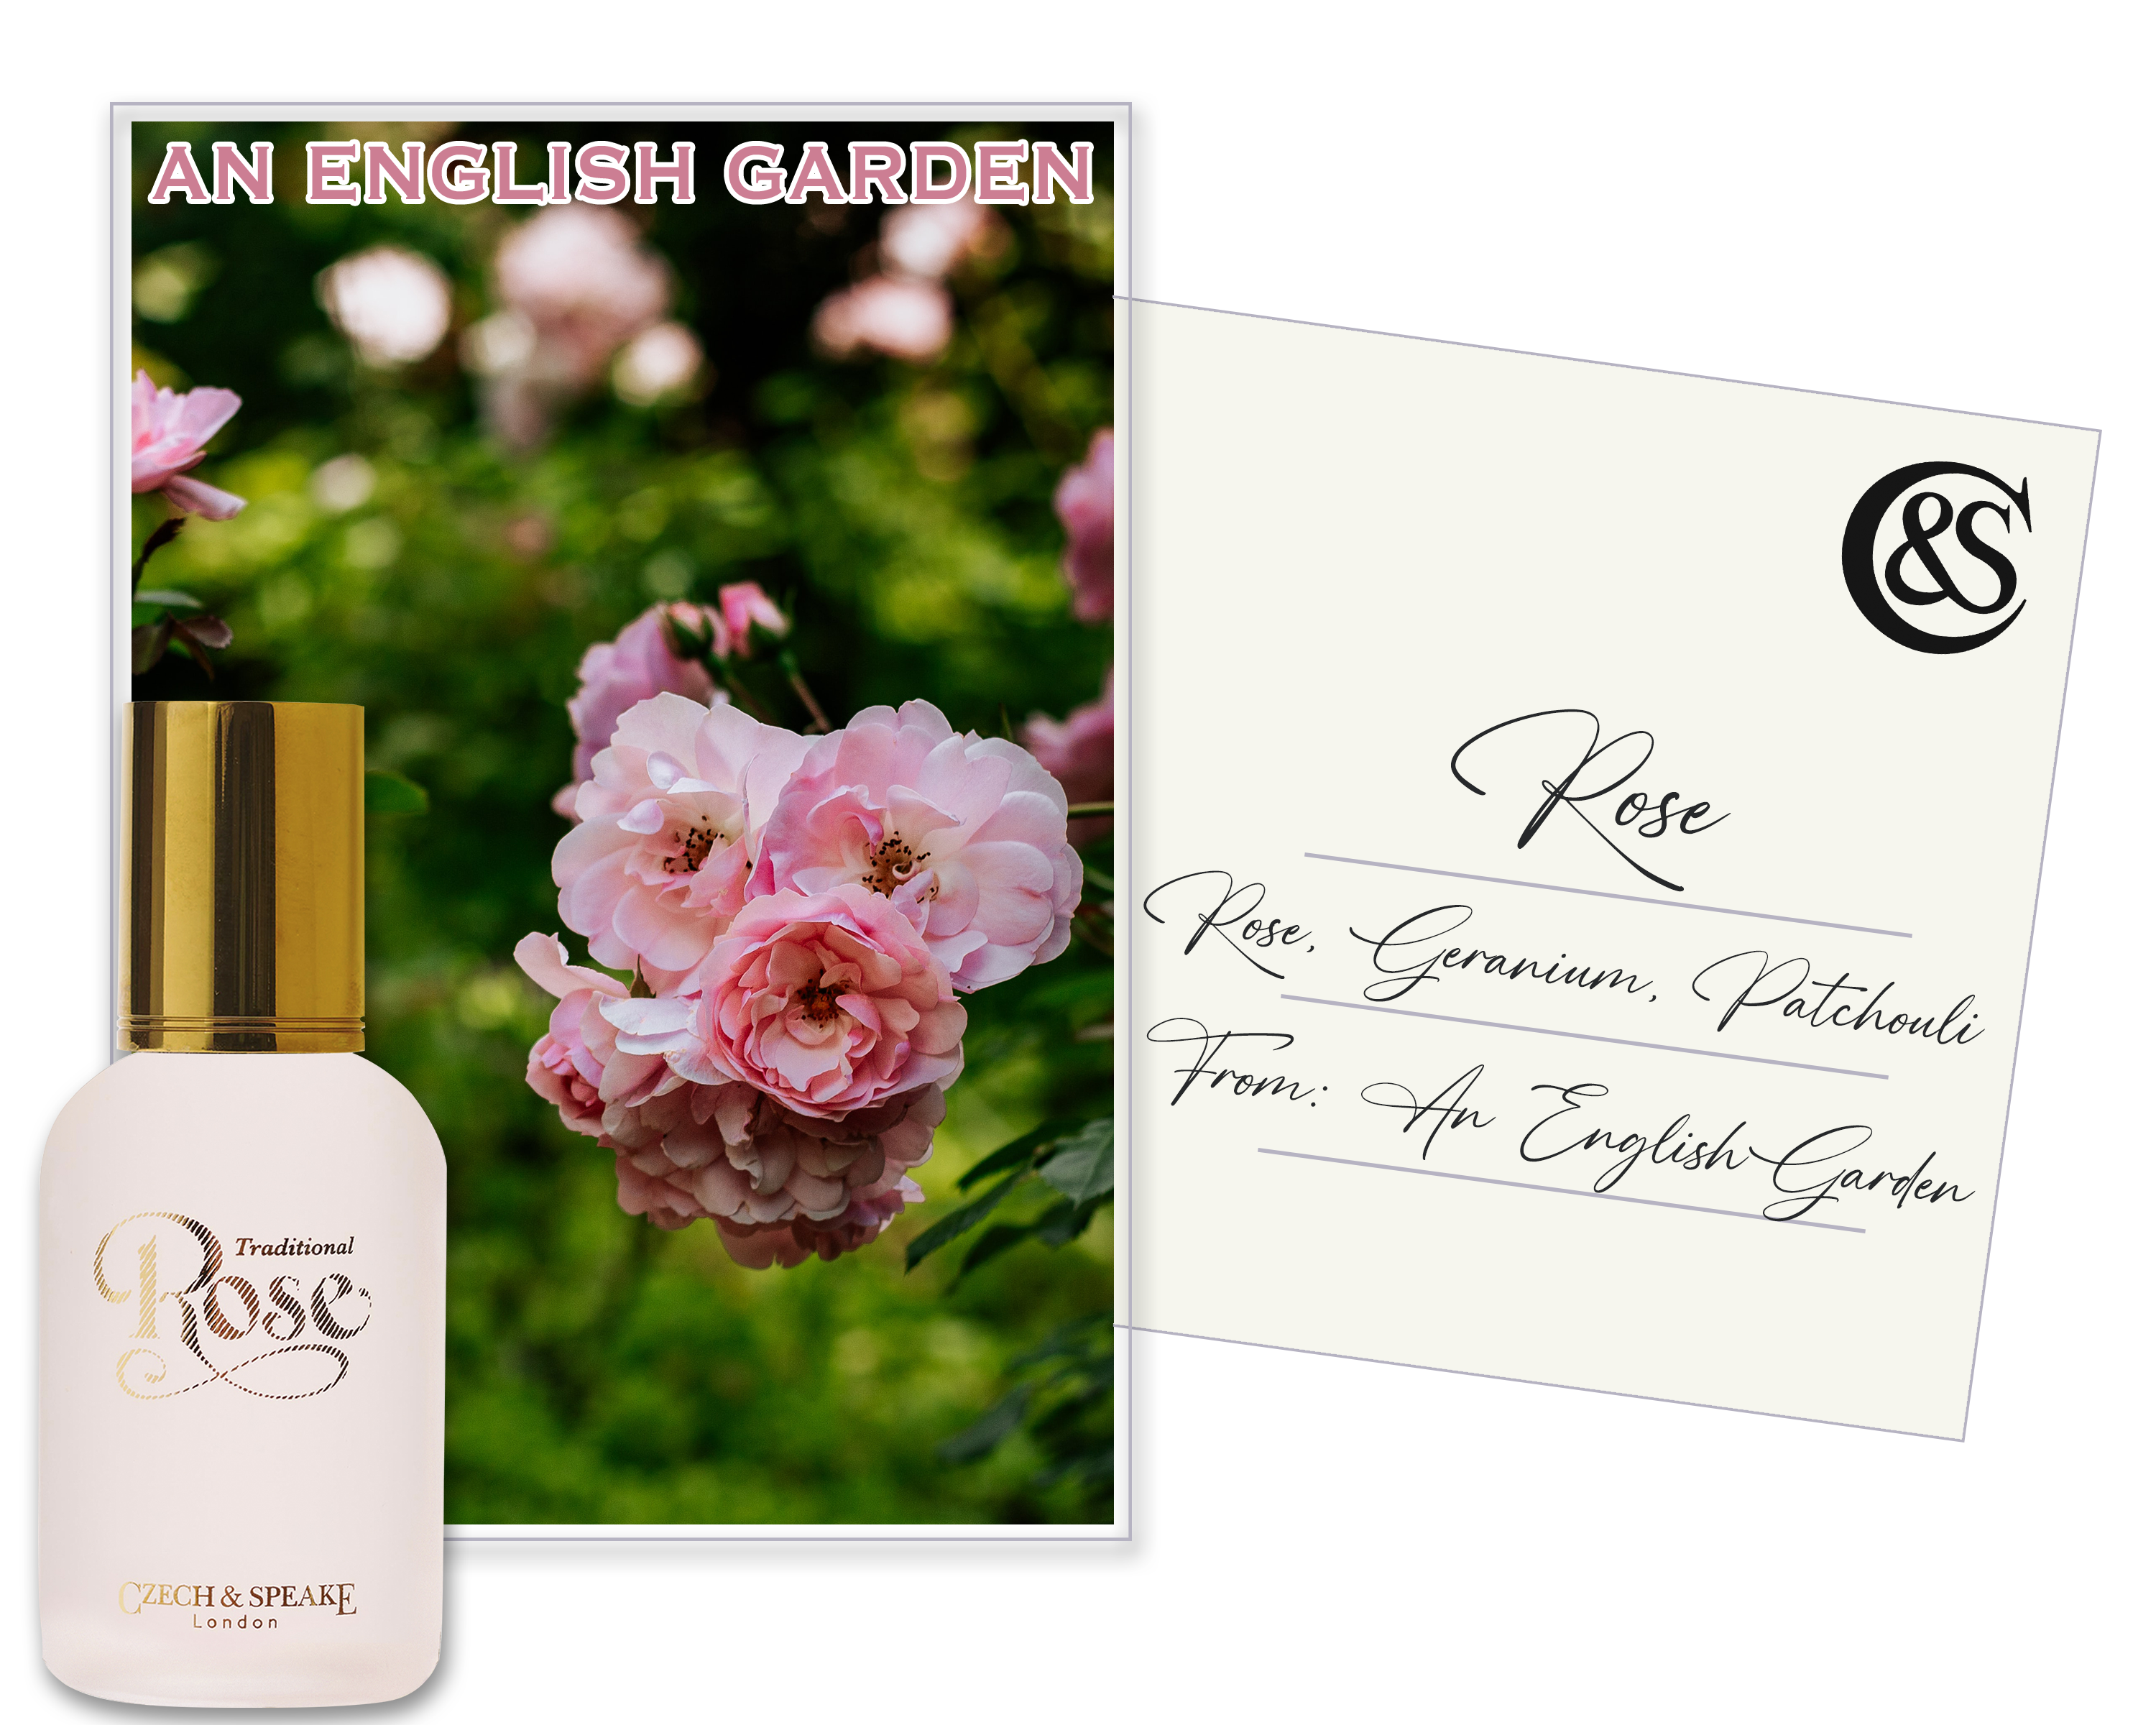 Rose Eau de Parfum 50ml bottle with An English Country Garden postcard, with Rose, fragrances notes and destination on reverse.